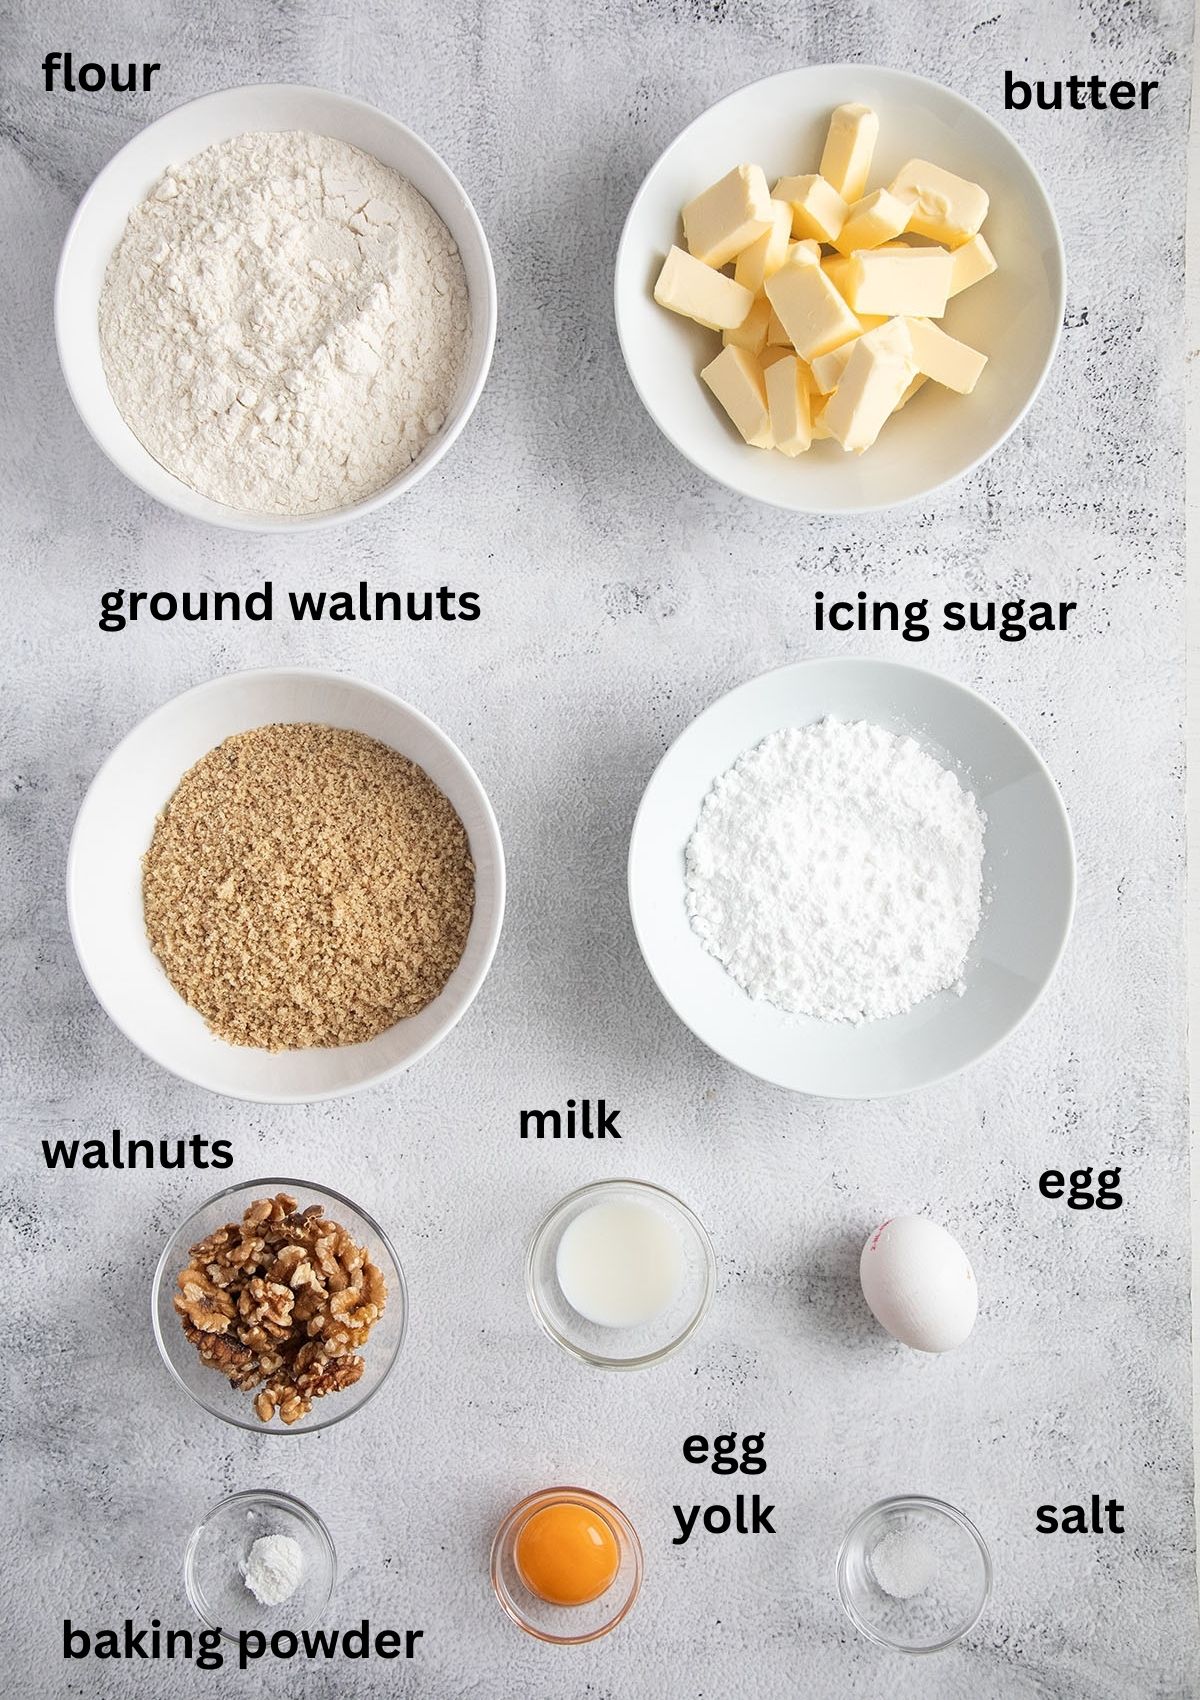 labeled ingredients for making chinese cookies with walnuts.